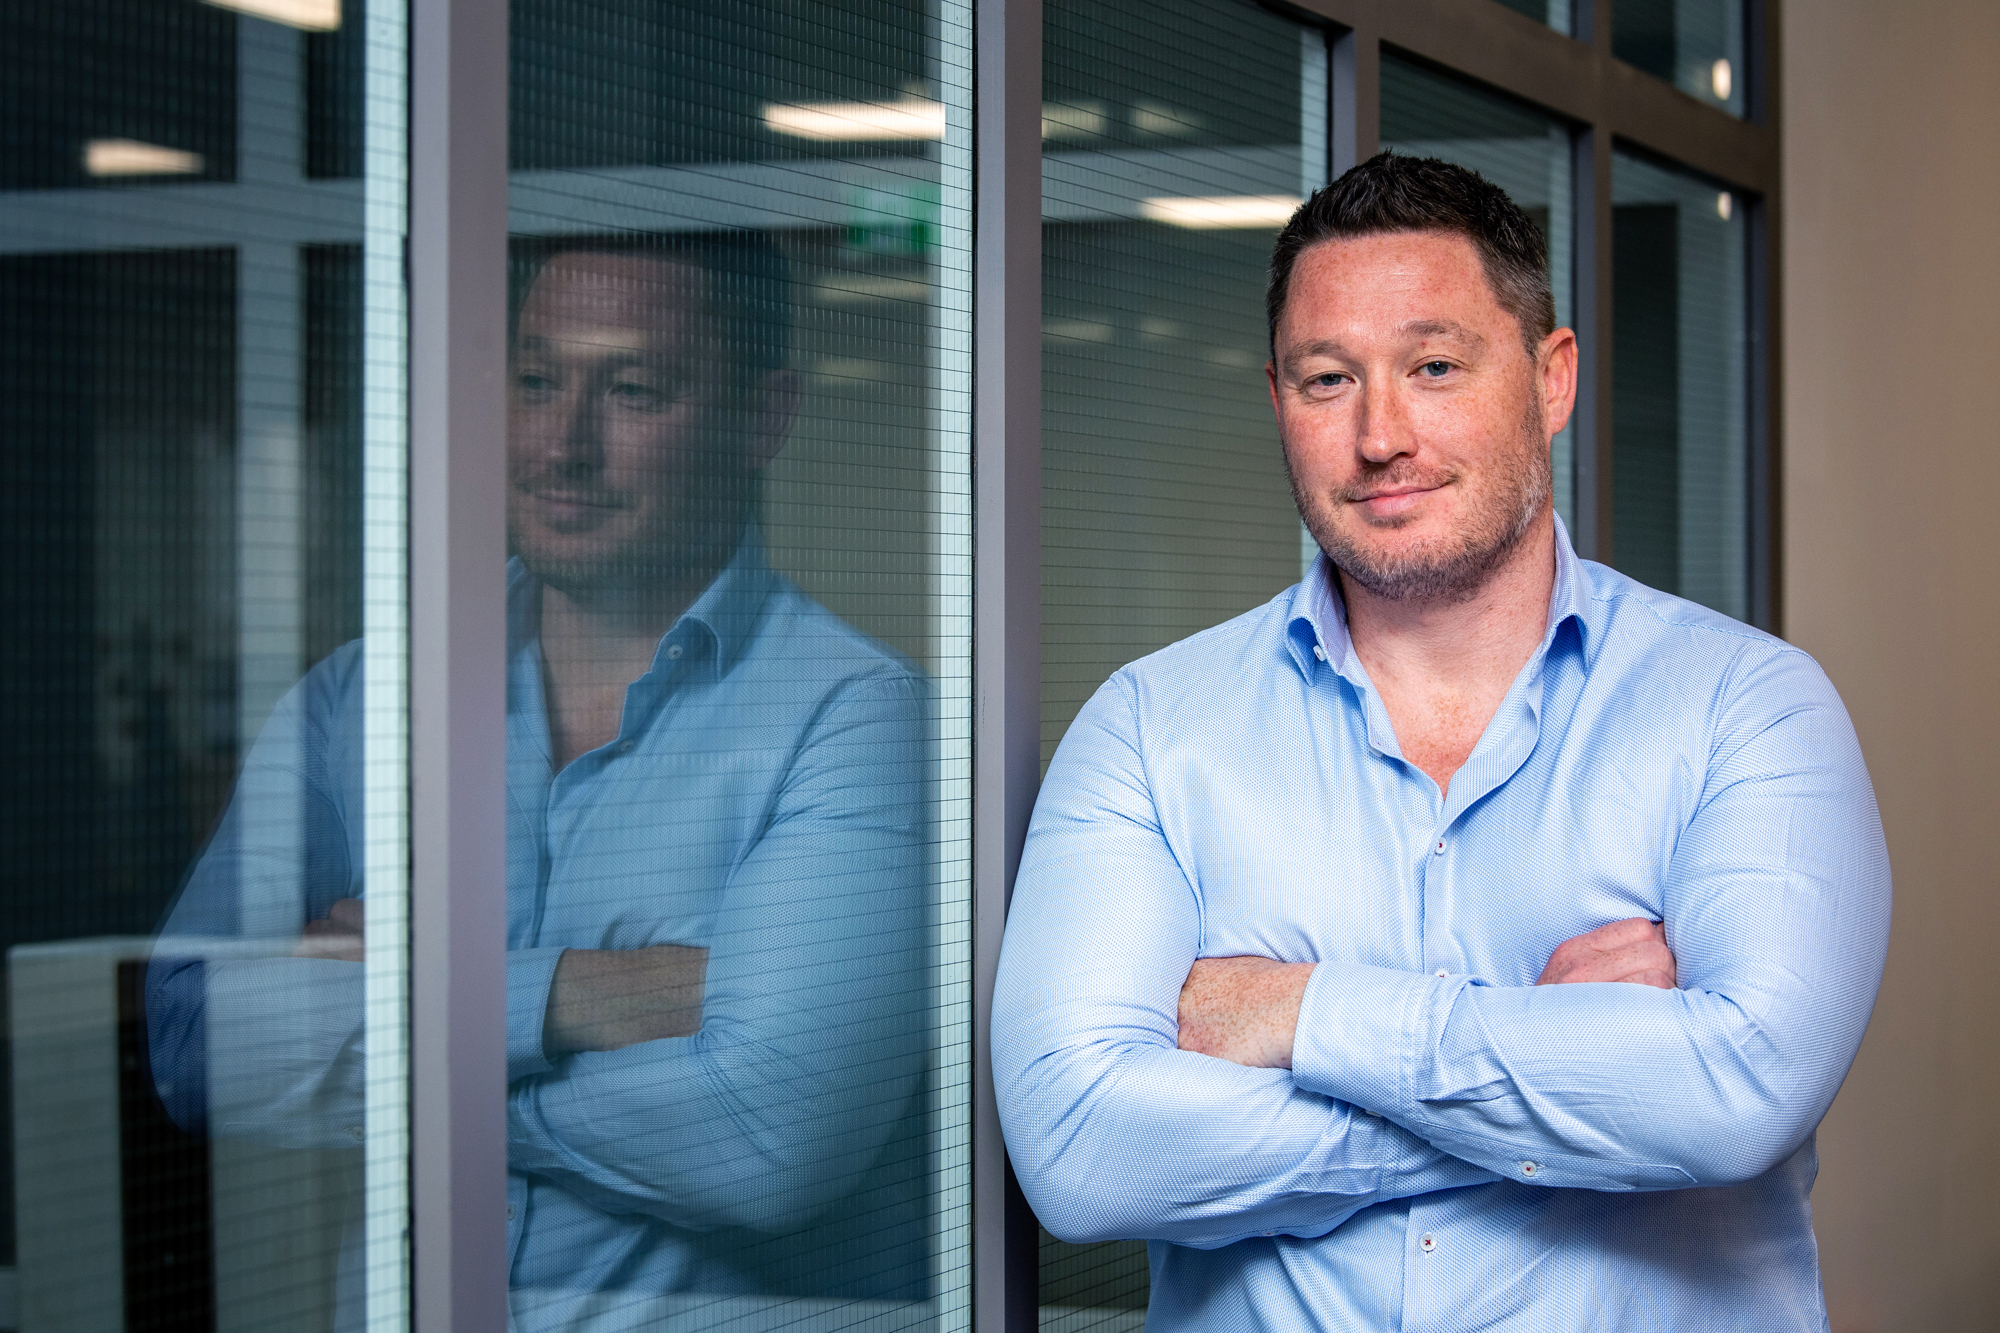 Tech-focused challenger business outlines launch plan-Business News Scotland